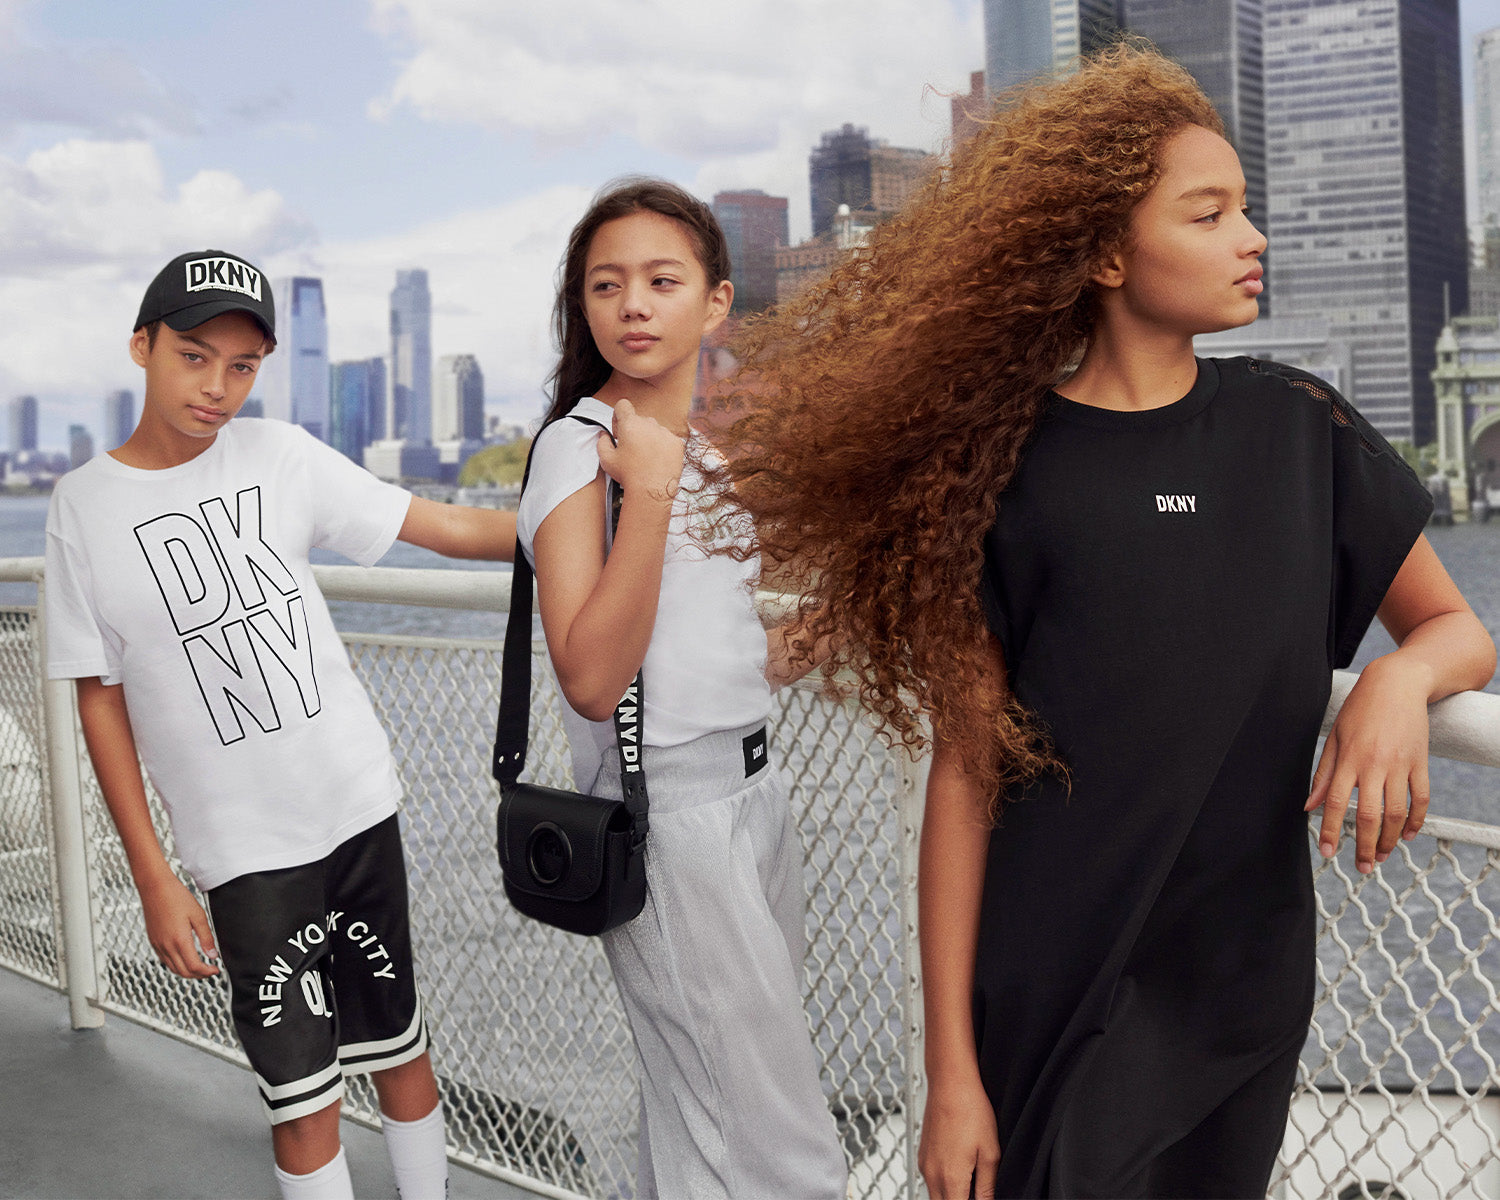 DKNY'S NEW COLLECTION TAKES THE BRAND HOME